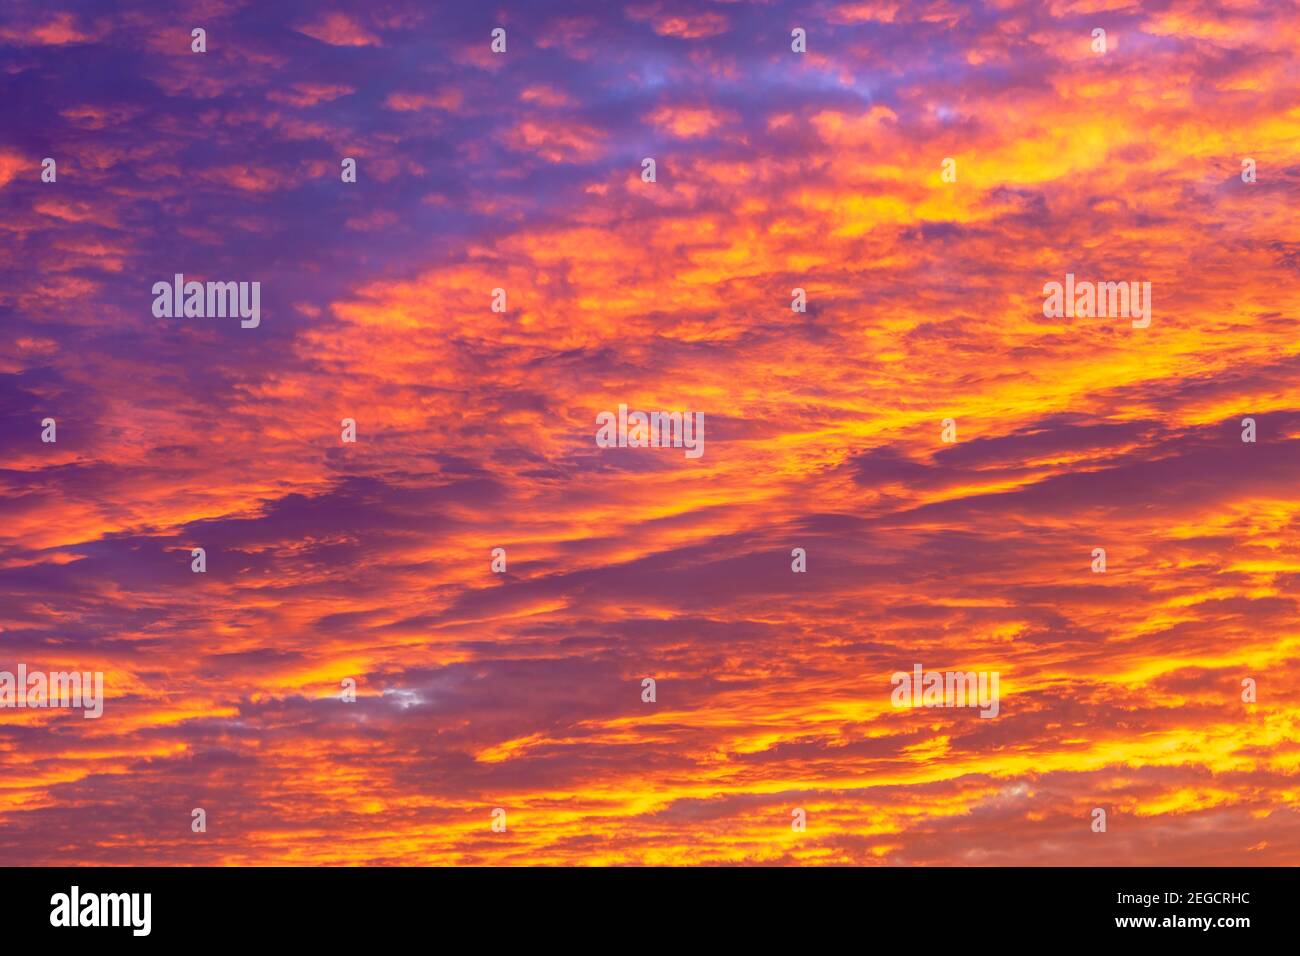 Sunset, clouds in the evening sky, Bavaria, Germany, Europe Stock Photo